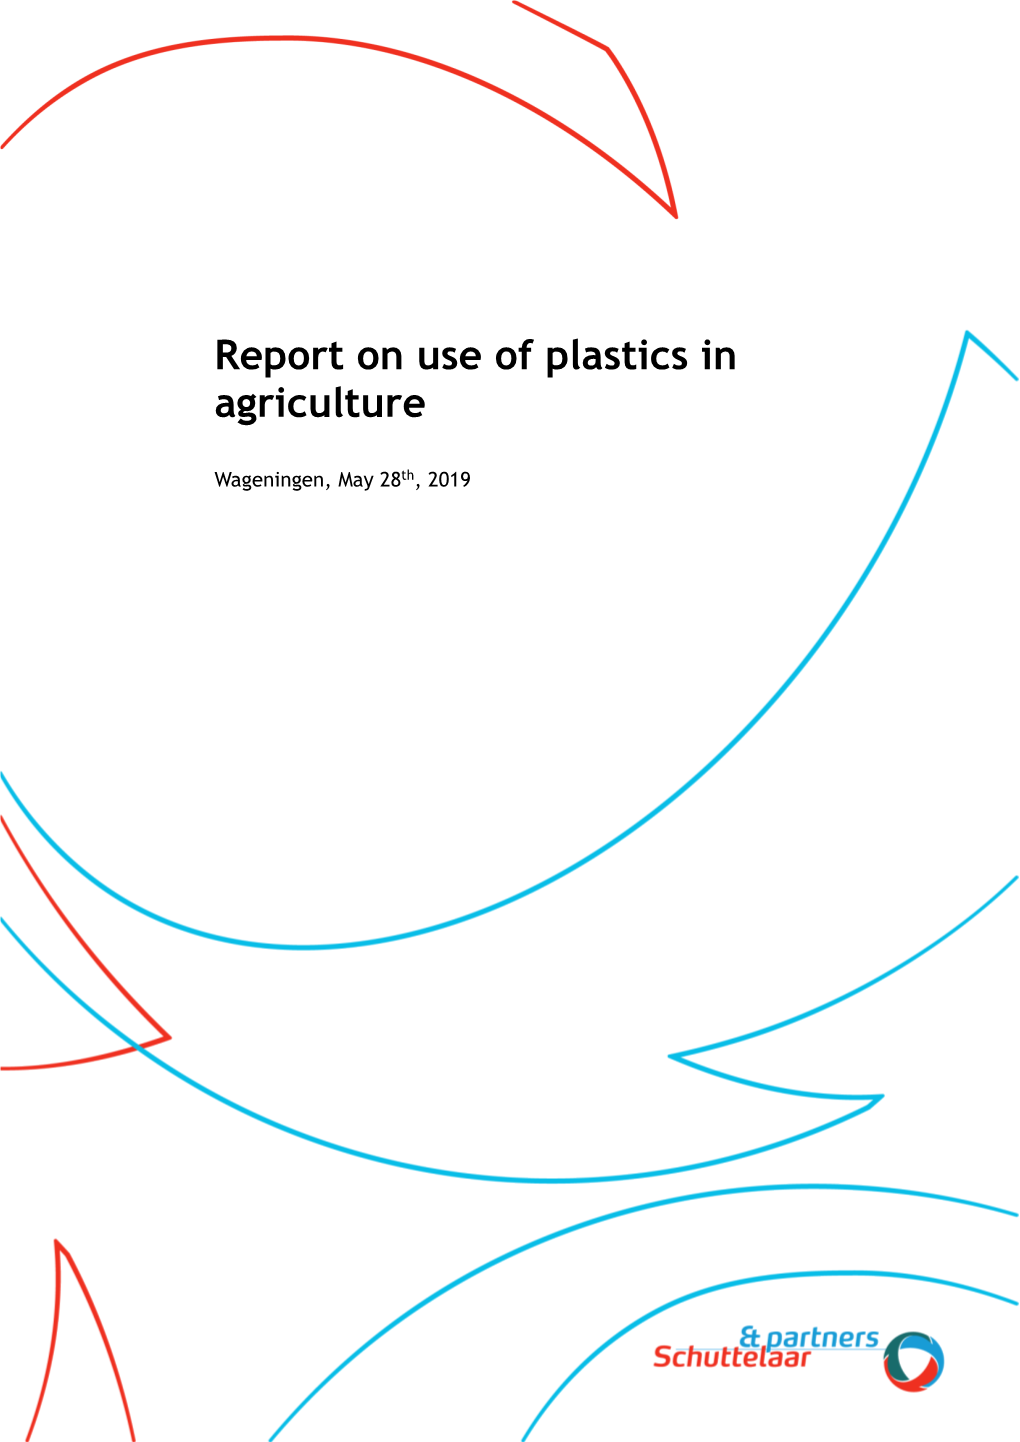 Report on Use of Plastics in Agriculture